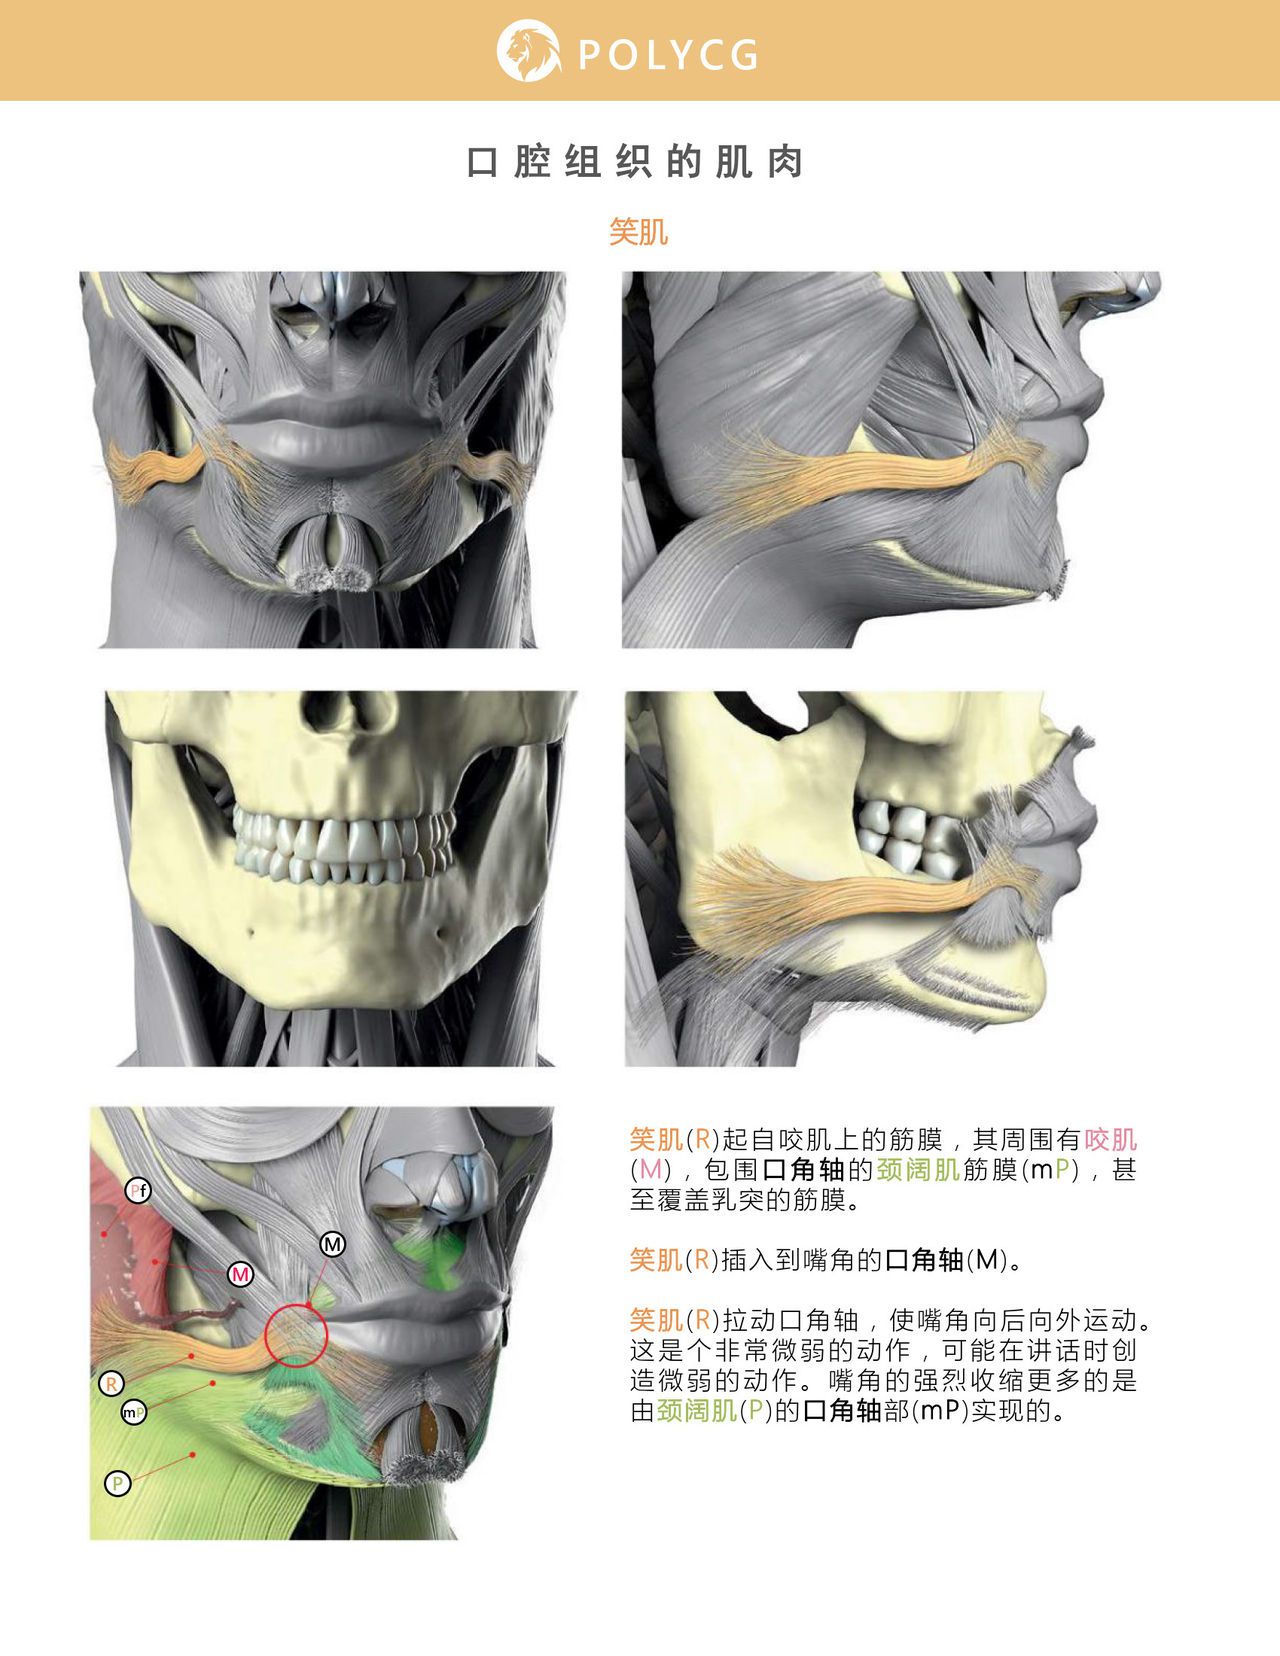 Uldis Zarins-Anatomy of Facial Expression-Exonicus [Chinese] 面部表情艺用解剖 [中文版] 114